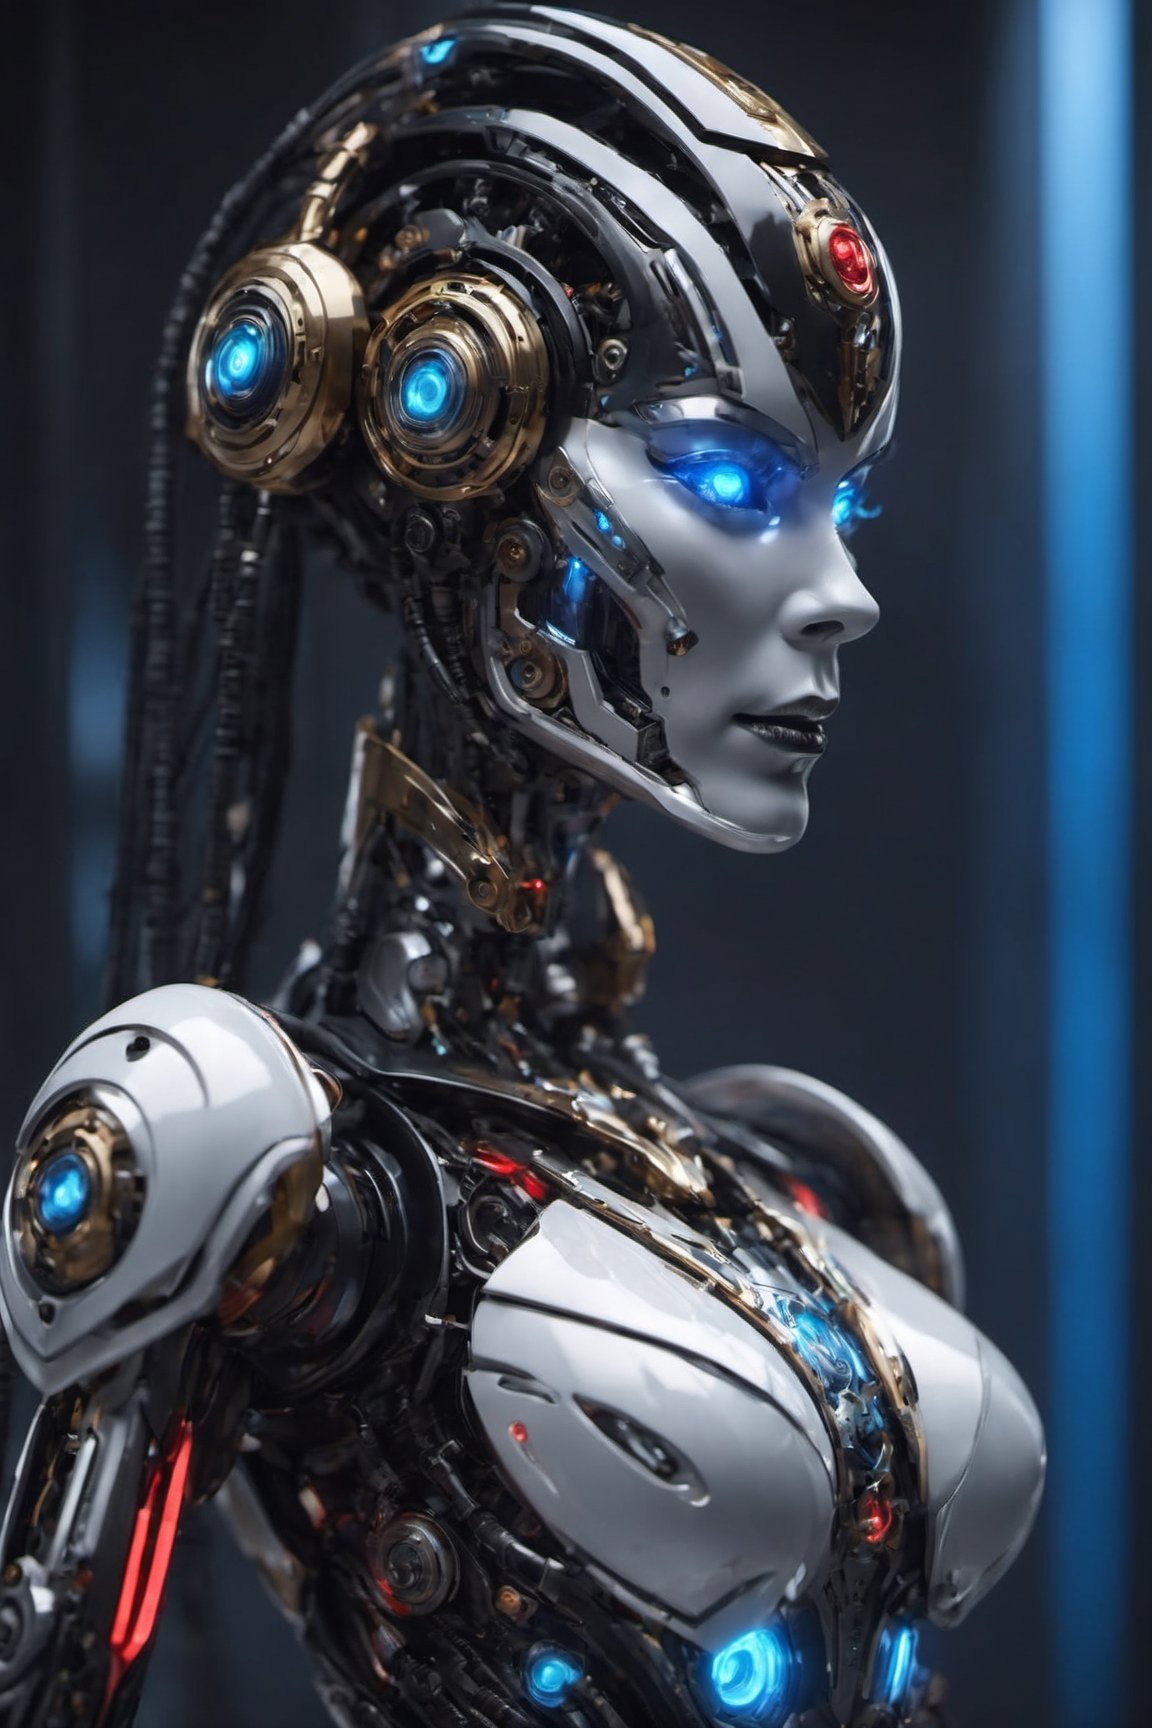 Best quality, masterpiece, ultra high res, (photorealistic:1.37), raw photo, (close up shots:1.37), (half body shots:1.38), (1girl:1.38), (hi-tech mechanical make face with blue neon light eyes:1.35), futuristic female cyborg with a tincture for her nose wearing a metral mask, white metallic body, hi-tech biometric glowing,  ((big breast size:1.35)), (black and white metallic color otherwoeldly features and cutting-edge technology:1.35), teats、cyberpunked、Ultra-shiny ultra-hard Transformers cyborg body、((neon light translucent from join:1.34)), (Storing weapons in the body:1.33)、black and red ratio ratio、face perfect, cleavage showing Superhero costume with intricate details, sensual pose, dynamic lighting, in the dark, deep shadow, low key, Tied waist、Colossal tits、(Ultra-shiny black and white colored titanium cyborg body covering the body:1.5)、((machine made joints:1.33)), ((machanical limbs)), ((mechanical cervial attaching to neck)), (wires and cables attaching to neck:1.33), (wires and cables on head:1.33), (character focus), science fiction, extreme detailed, highest detailed, perfect foot、perfect hand、Clean facial skin, A futuristic, depth of fields, reflective light, retinas, , awardwinning, hight resolution, cinematic image, (dynamic lighting to body:1.35), battelfield background, \,Movie Still,cyborg style,IMGFIX,Skull Head